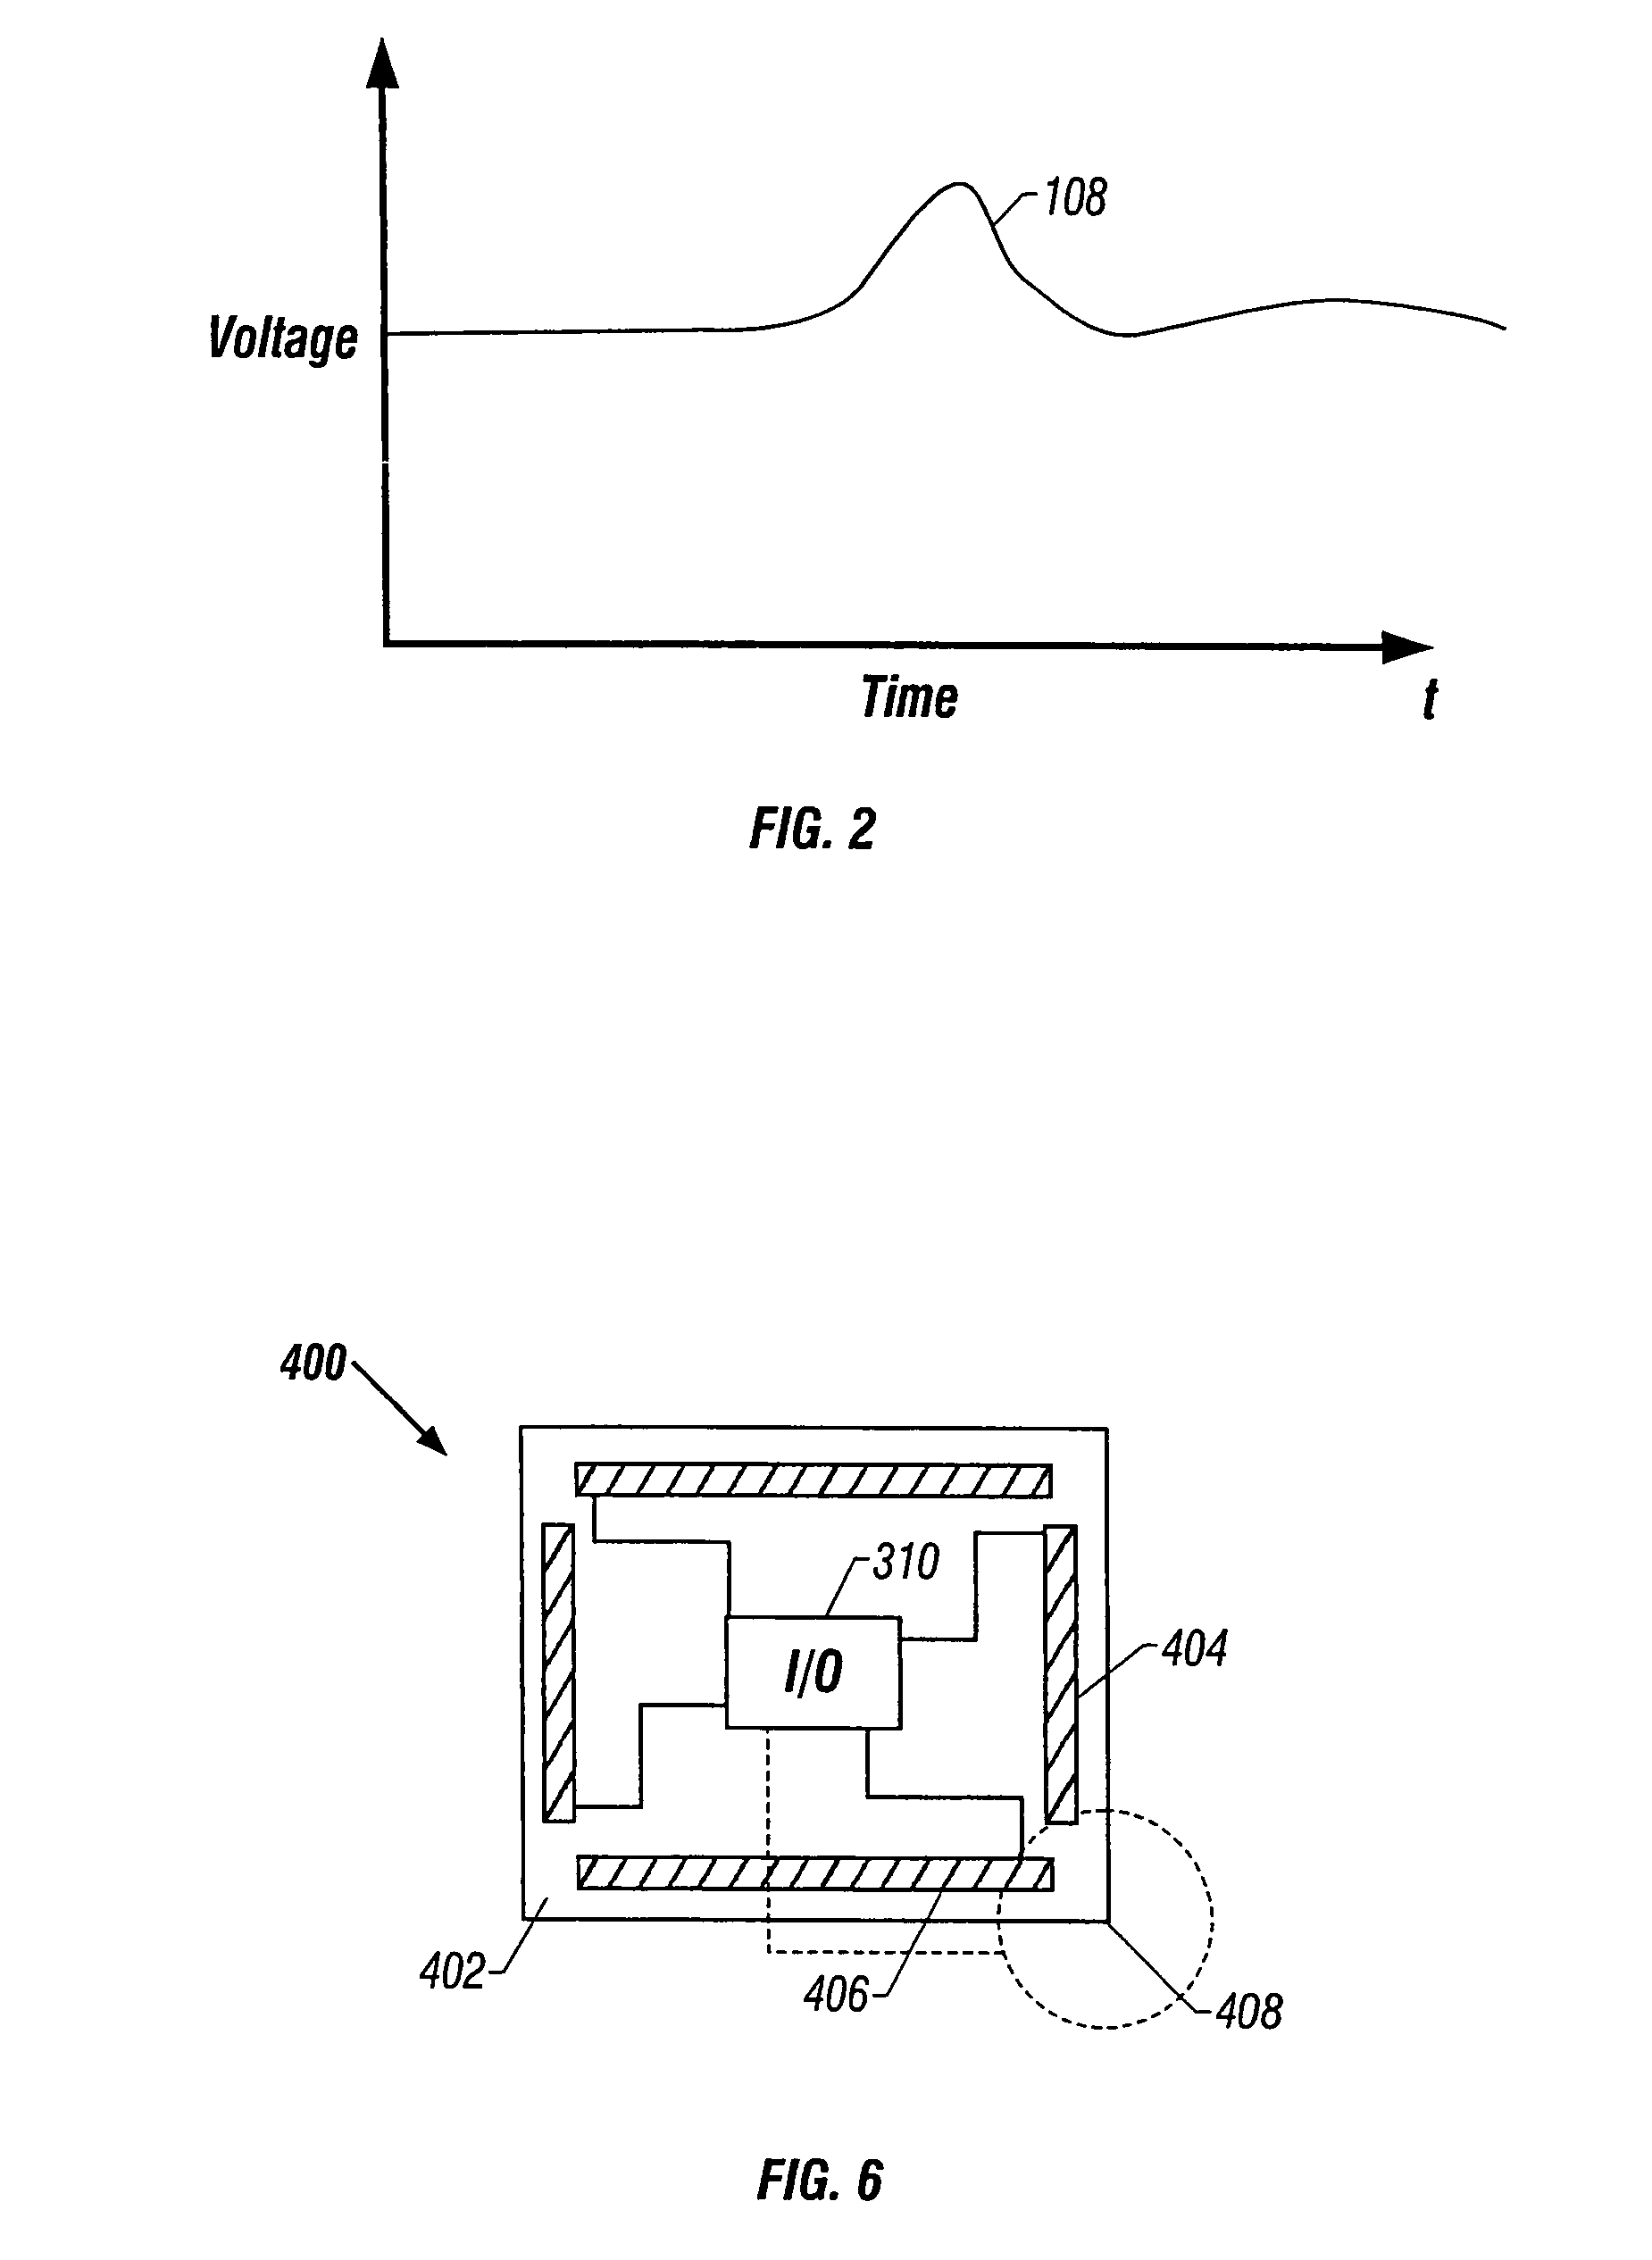 Computer interface device